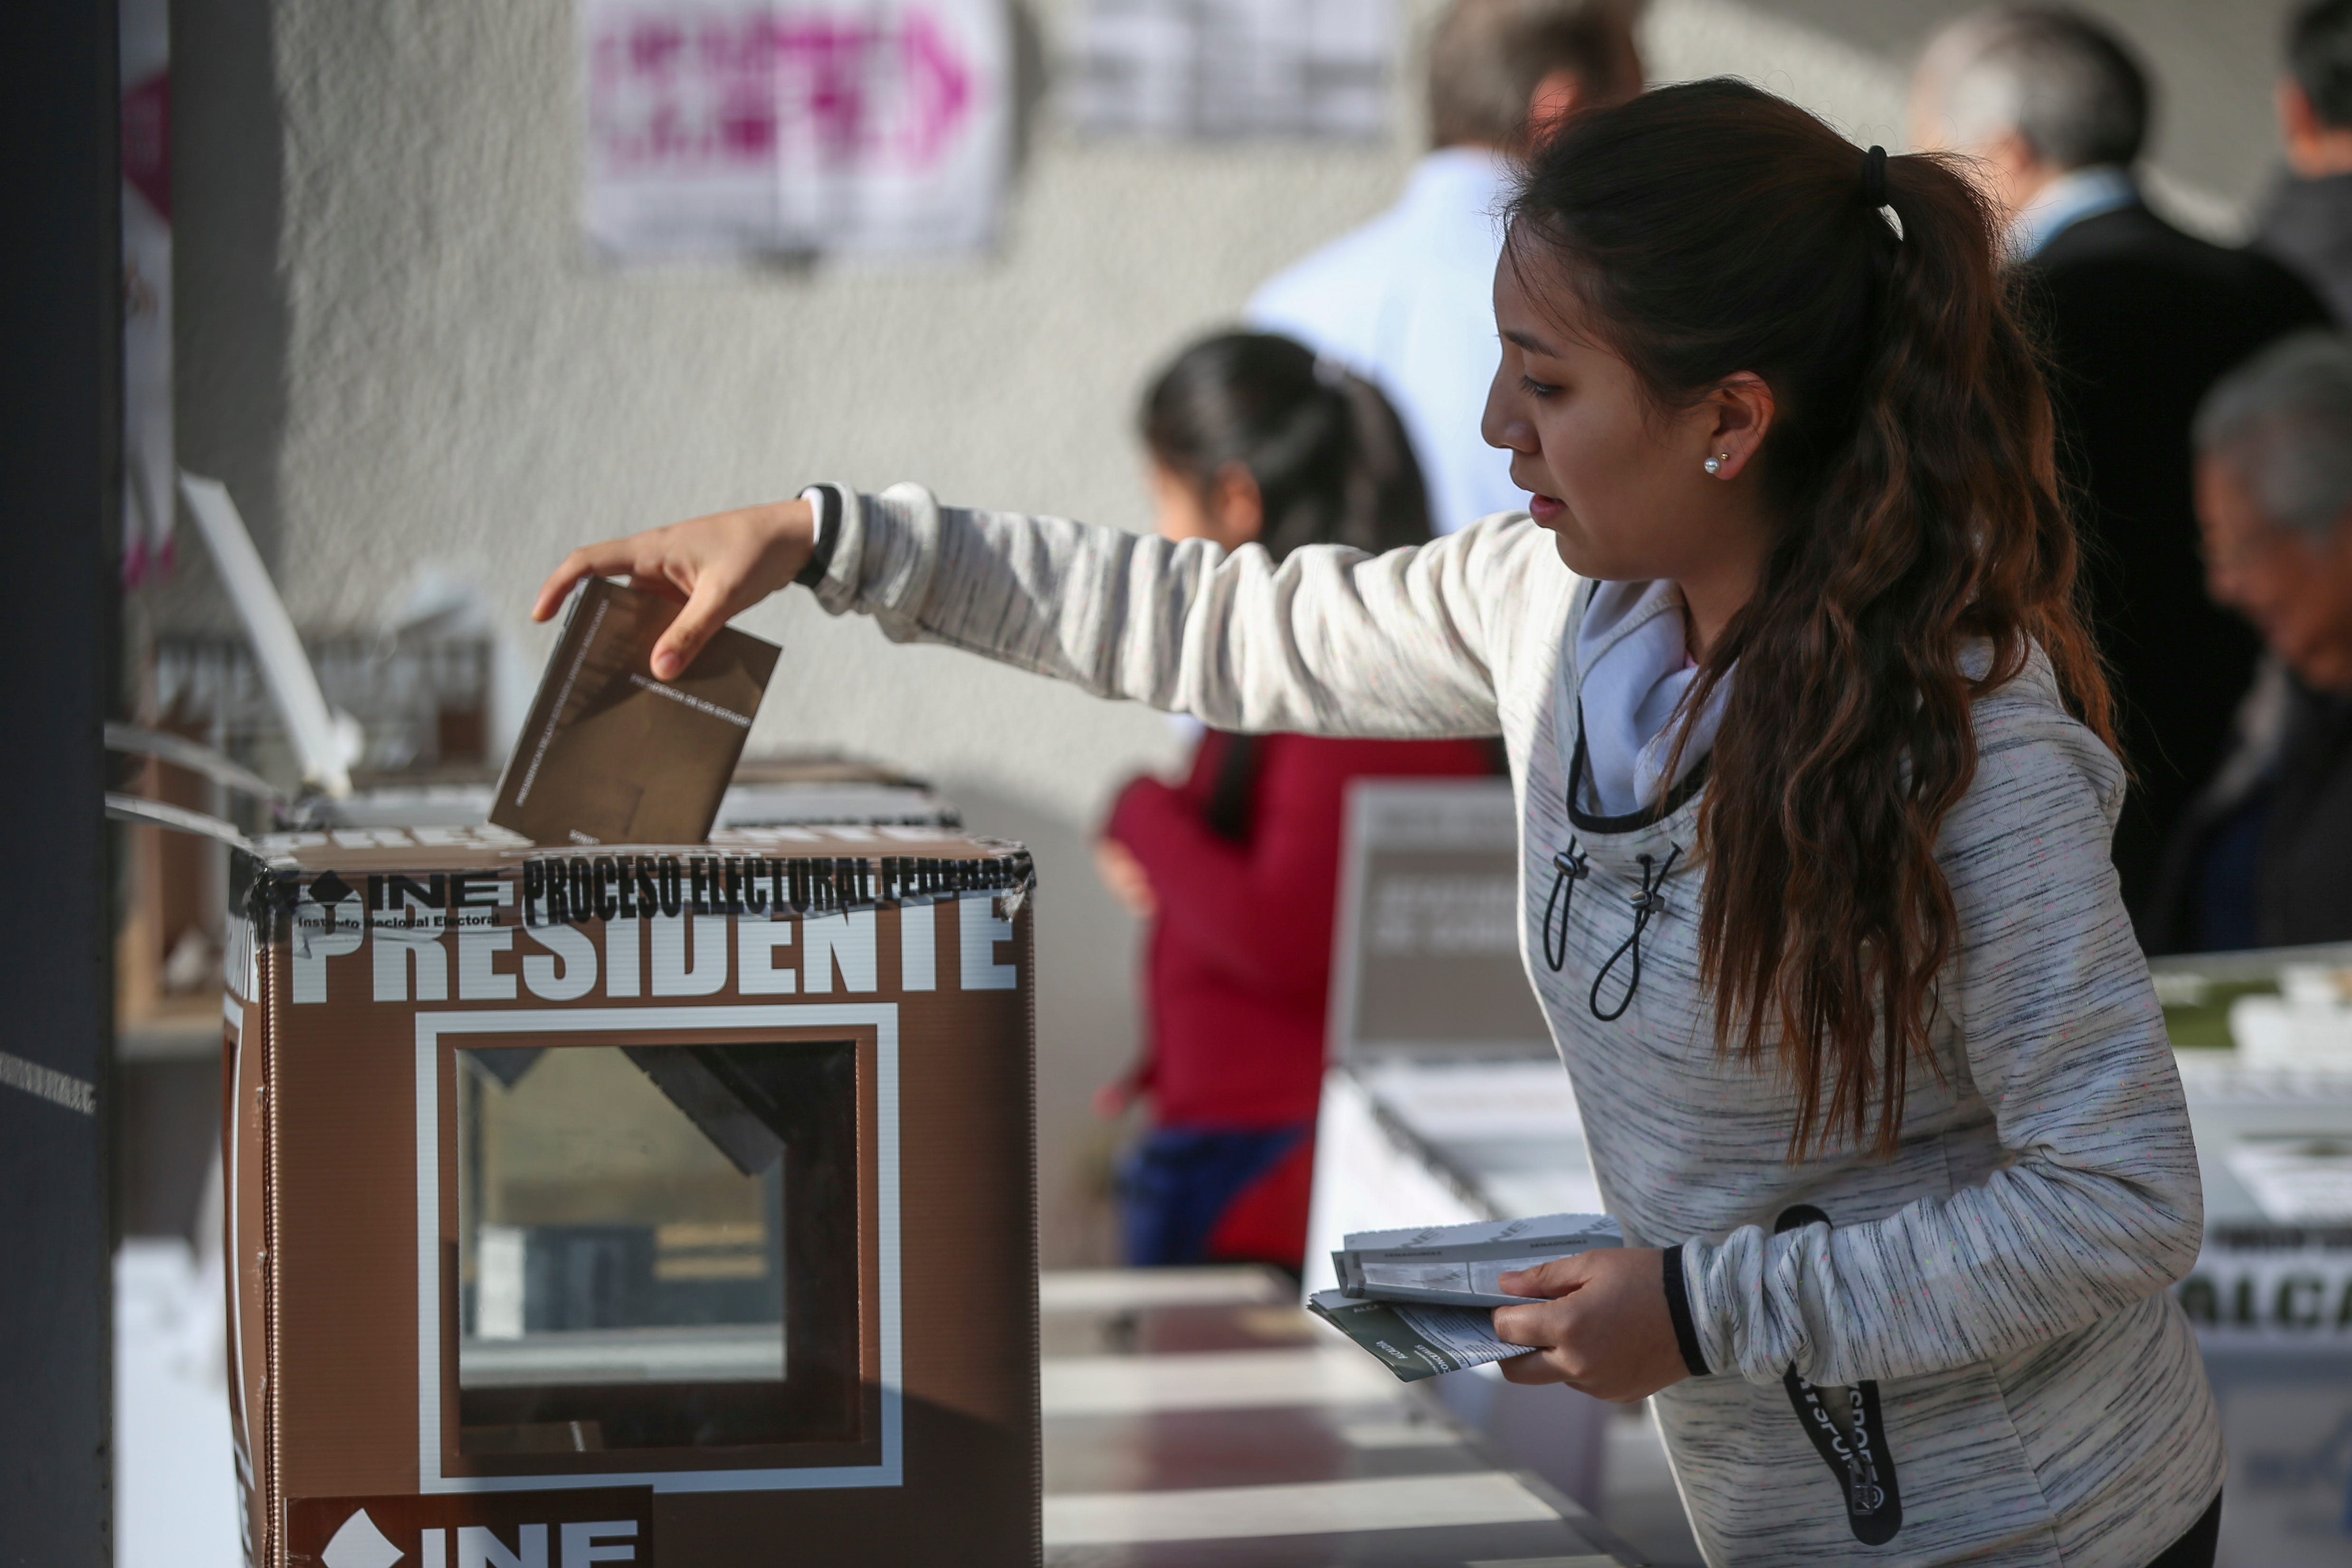 A woman casts her vote for president during general elections in Mexico City, July 1, 2018. Sunday's elections for posts at every level of government are Mexico's largest ever and have become a referendum on corruption, graft and other tricks used to